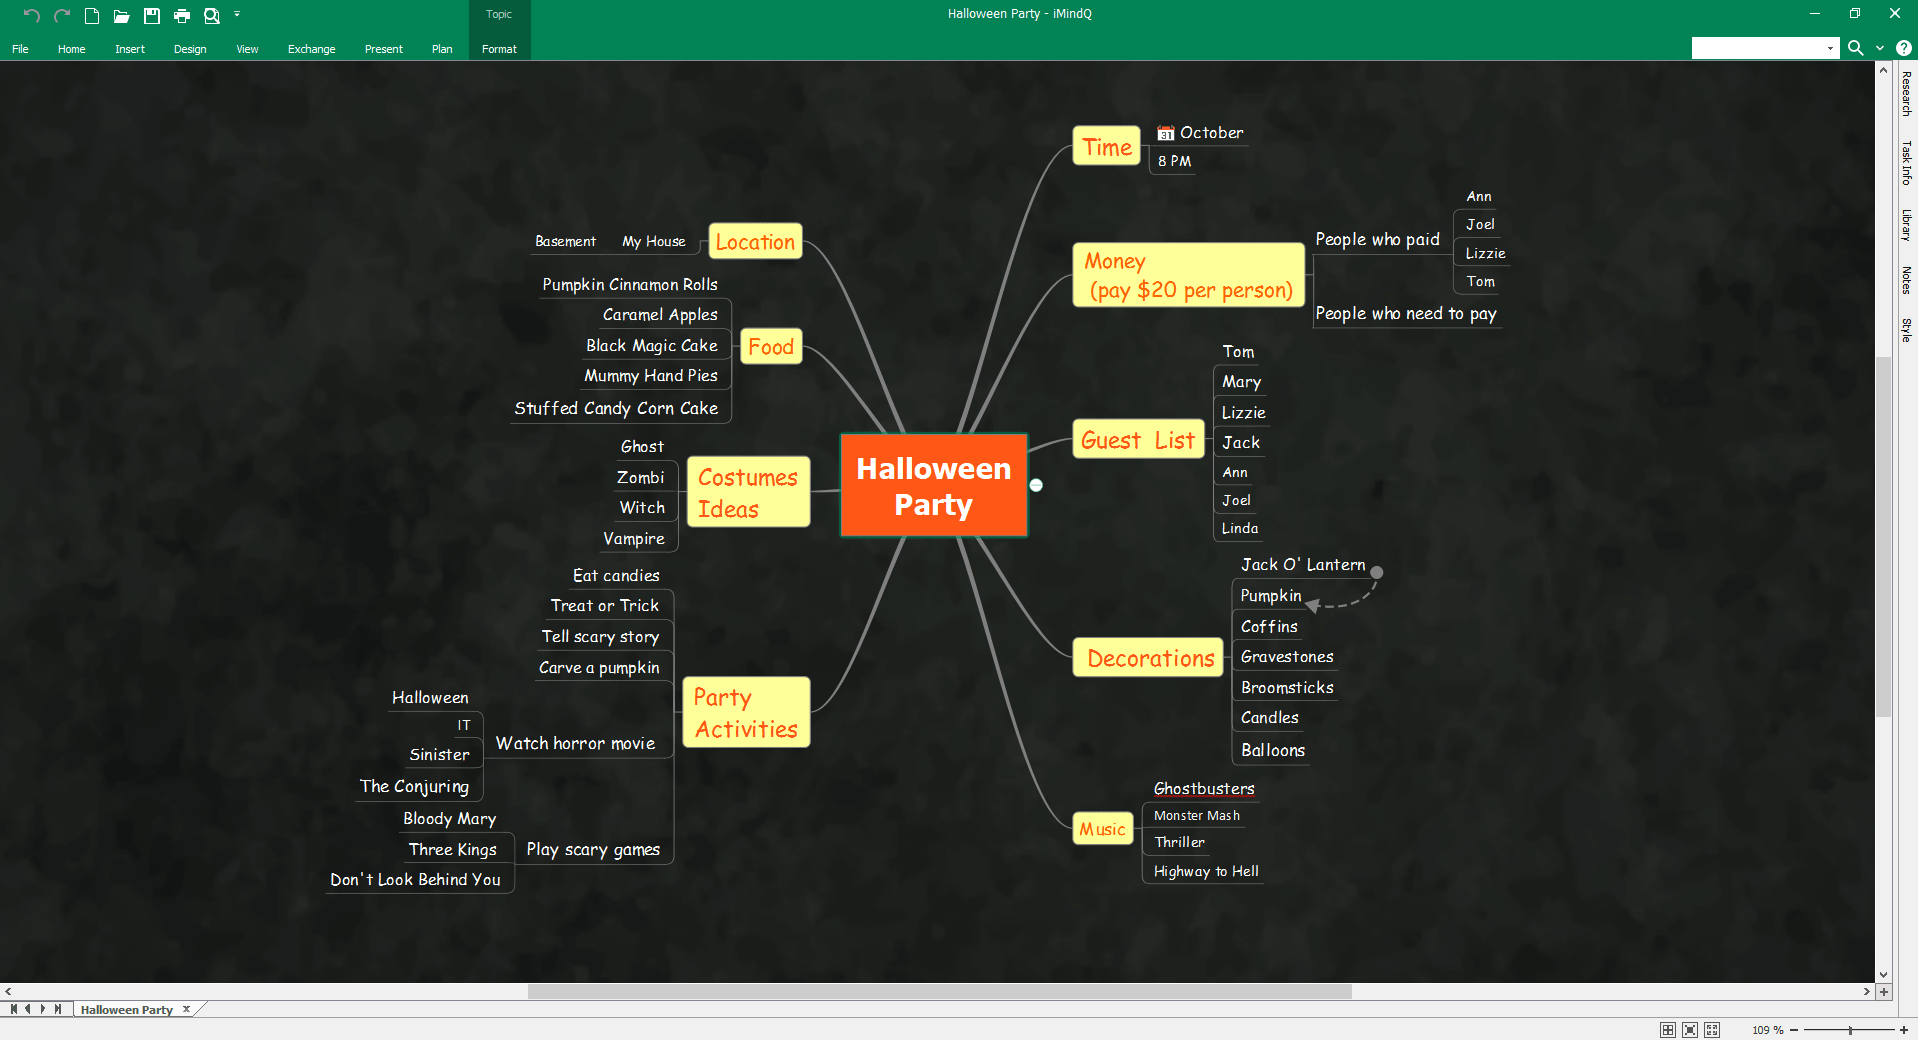 iMindQ Halloween Party Mind Map